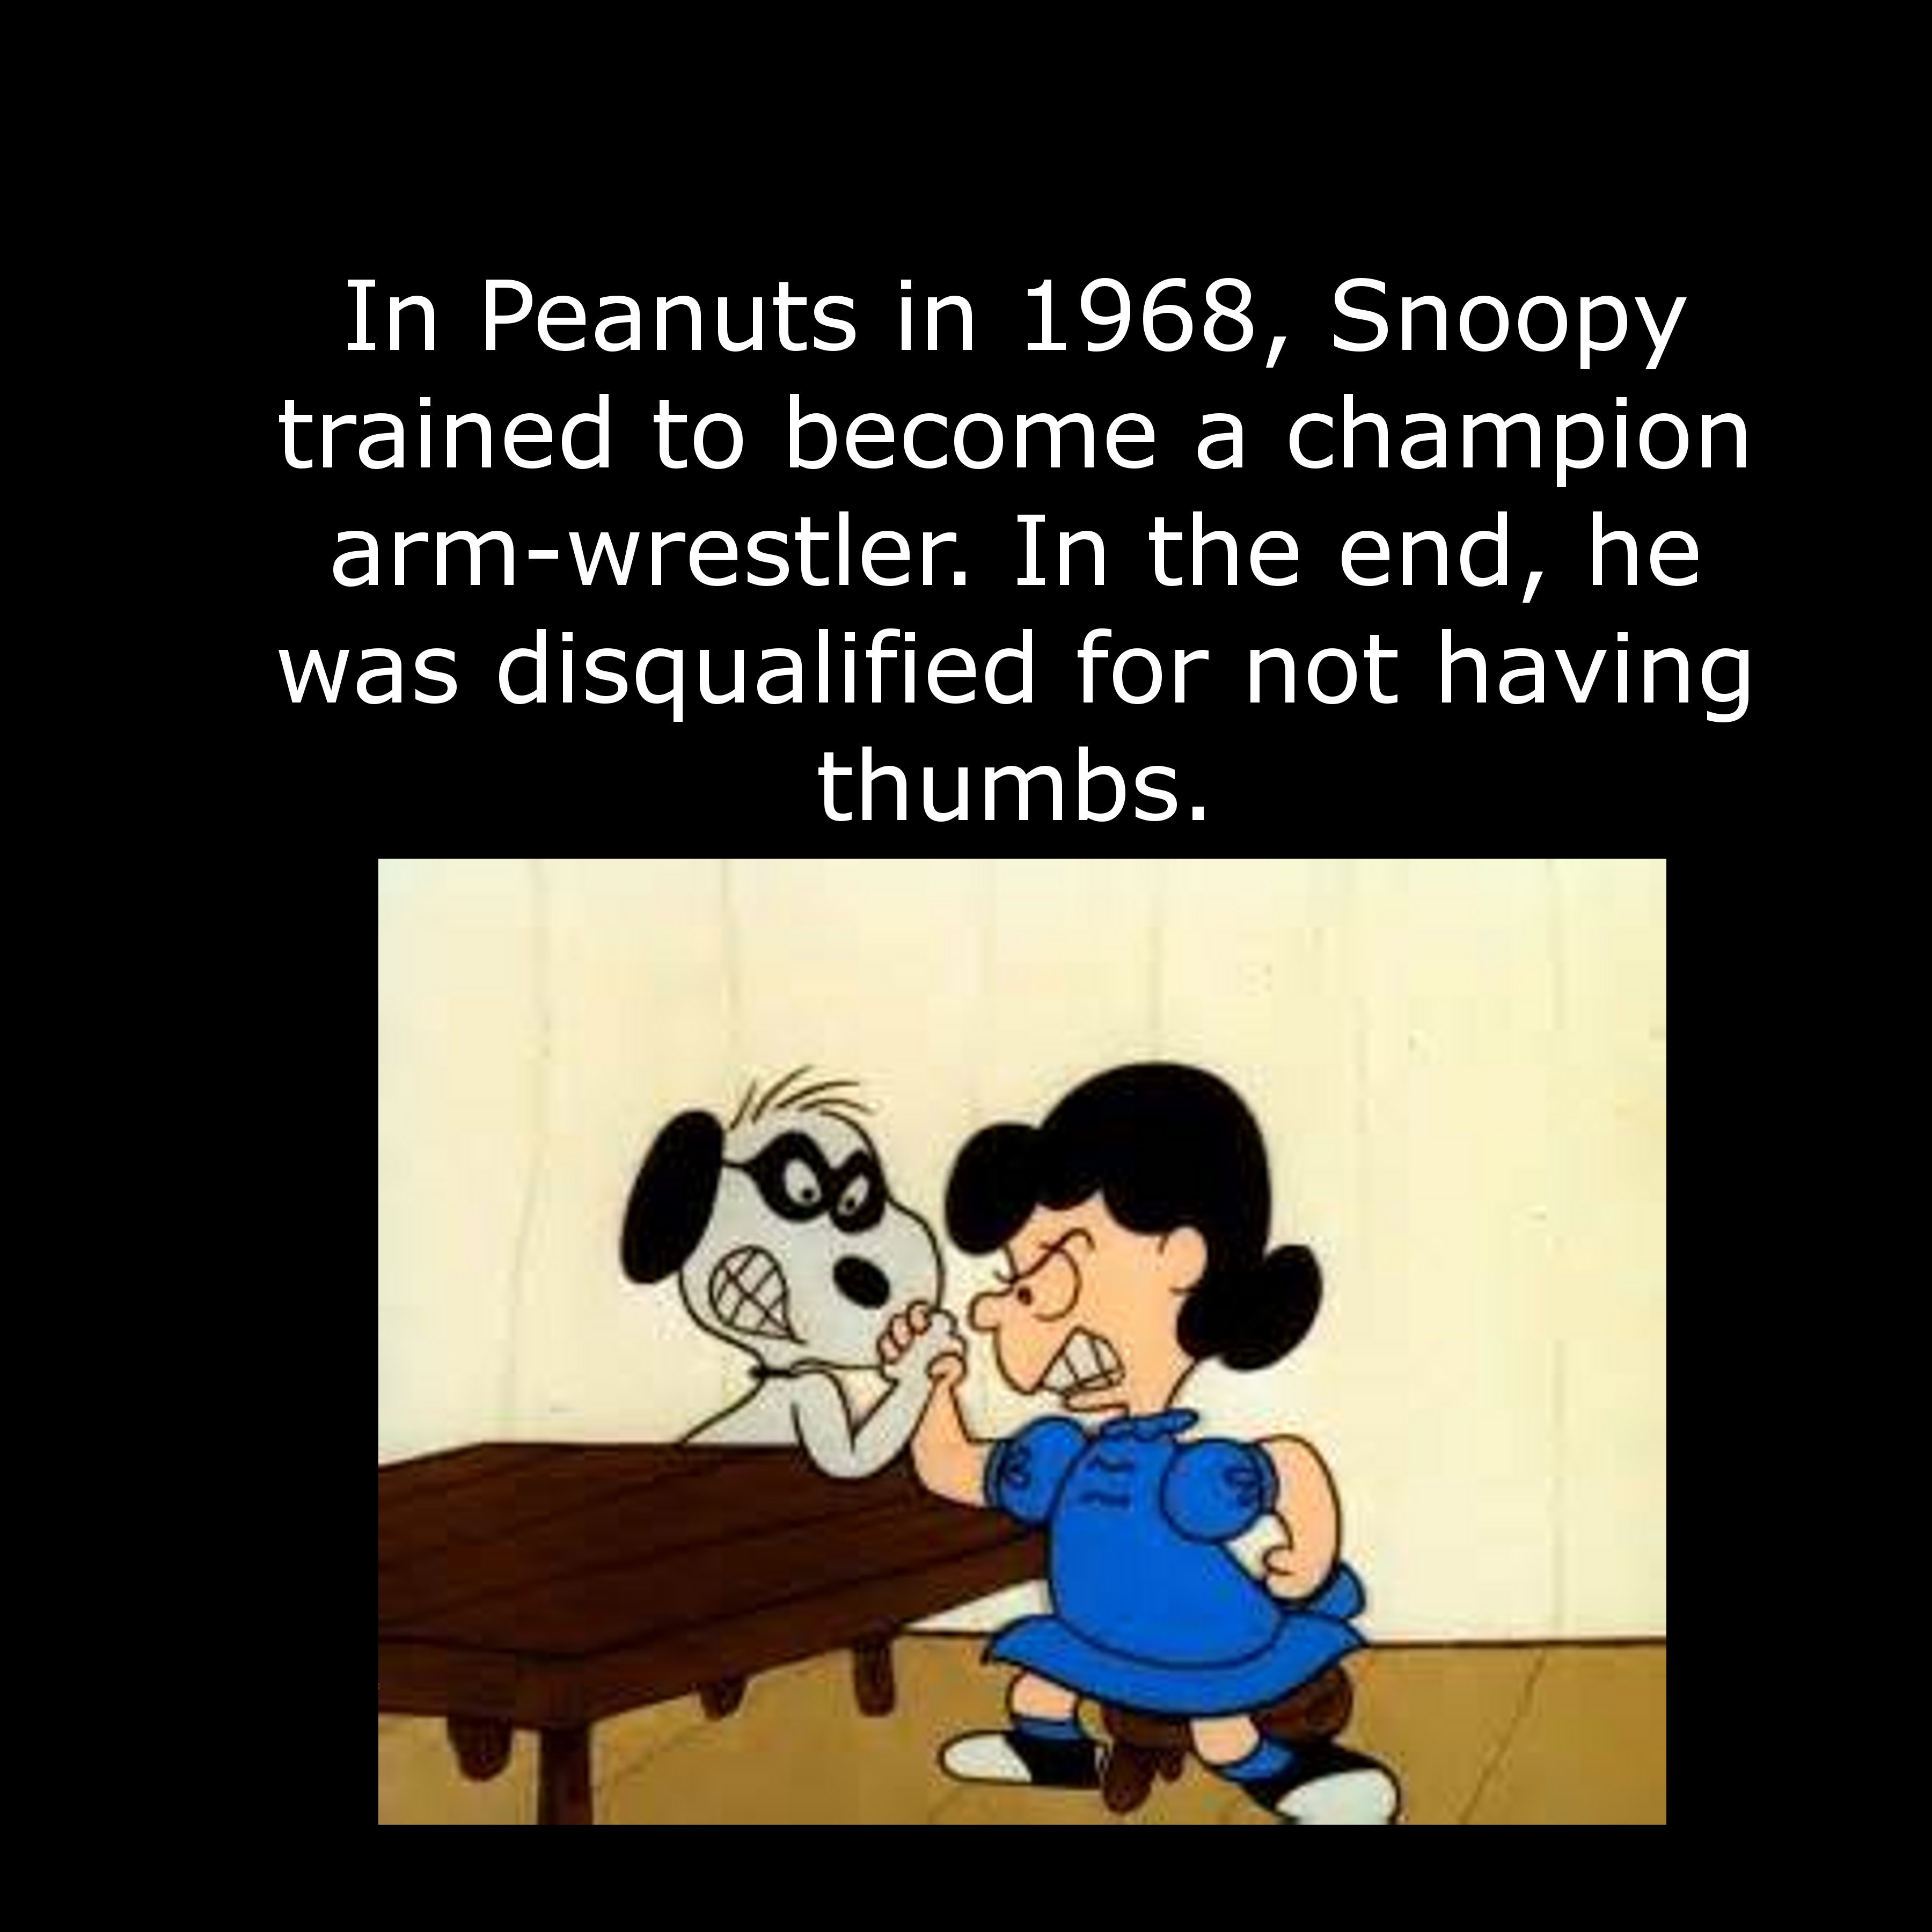 cartoon - In Peanuts in 1968, Snoopy trained to become a champion armwrestler. In the end, he was disqualified for not having thumbs.